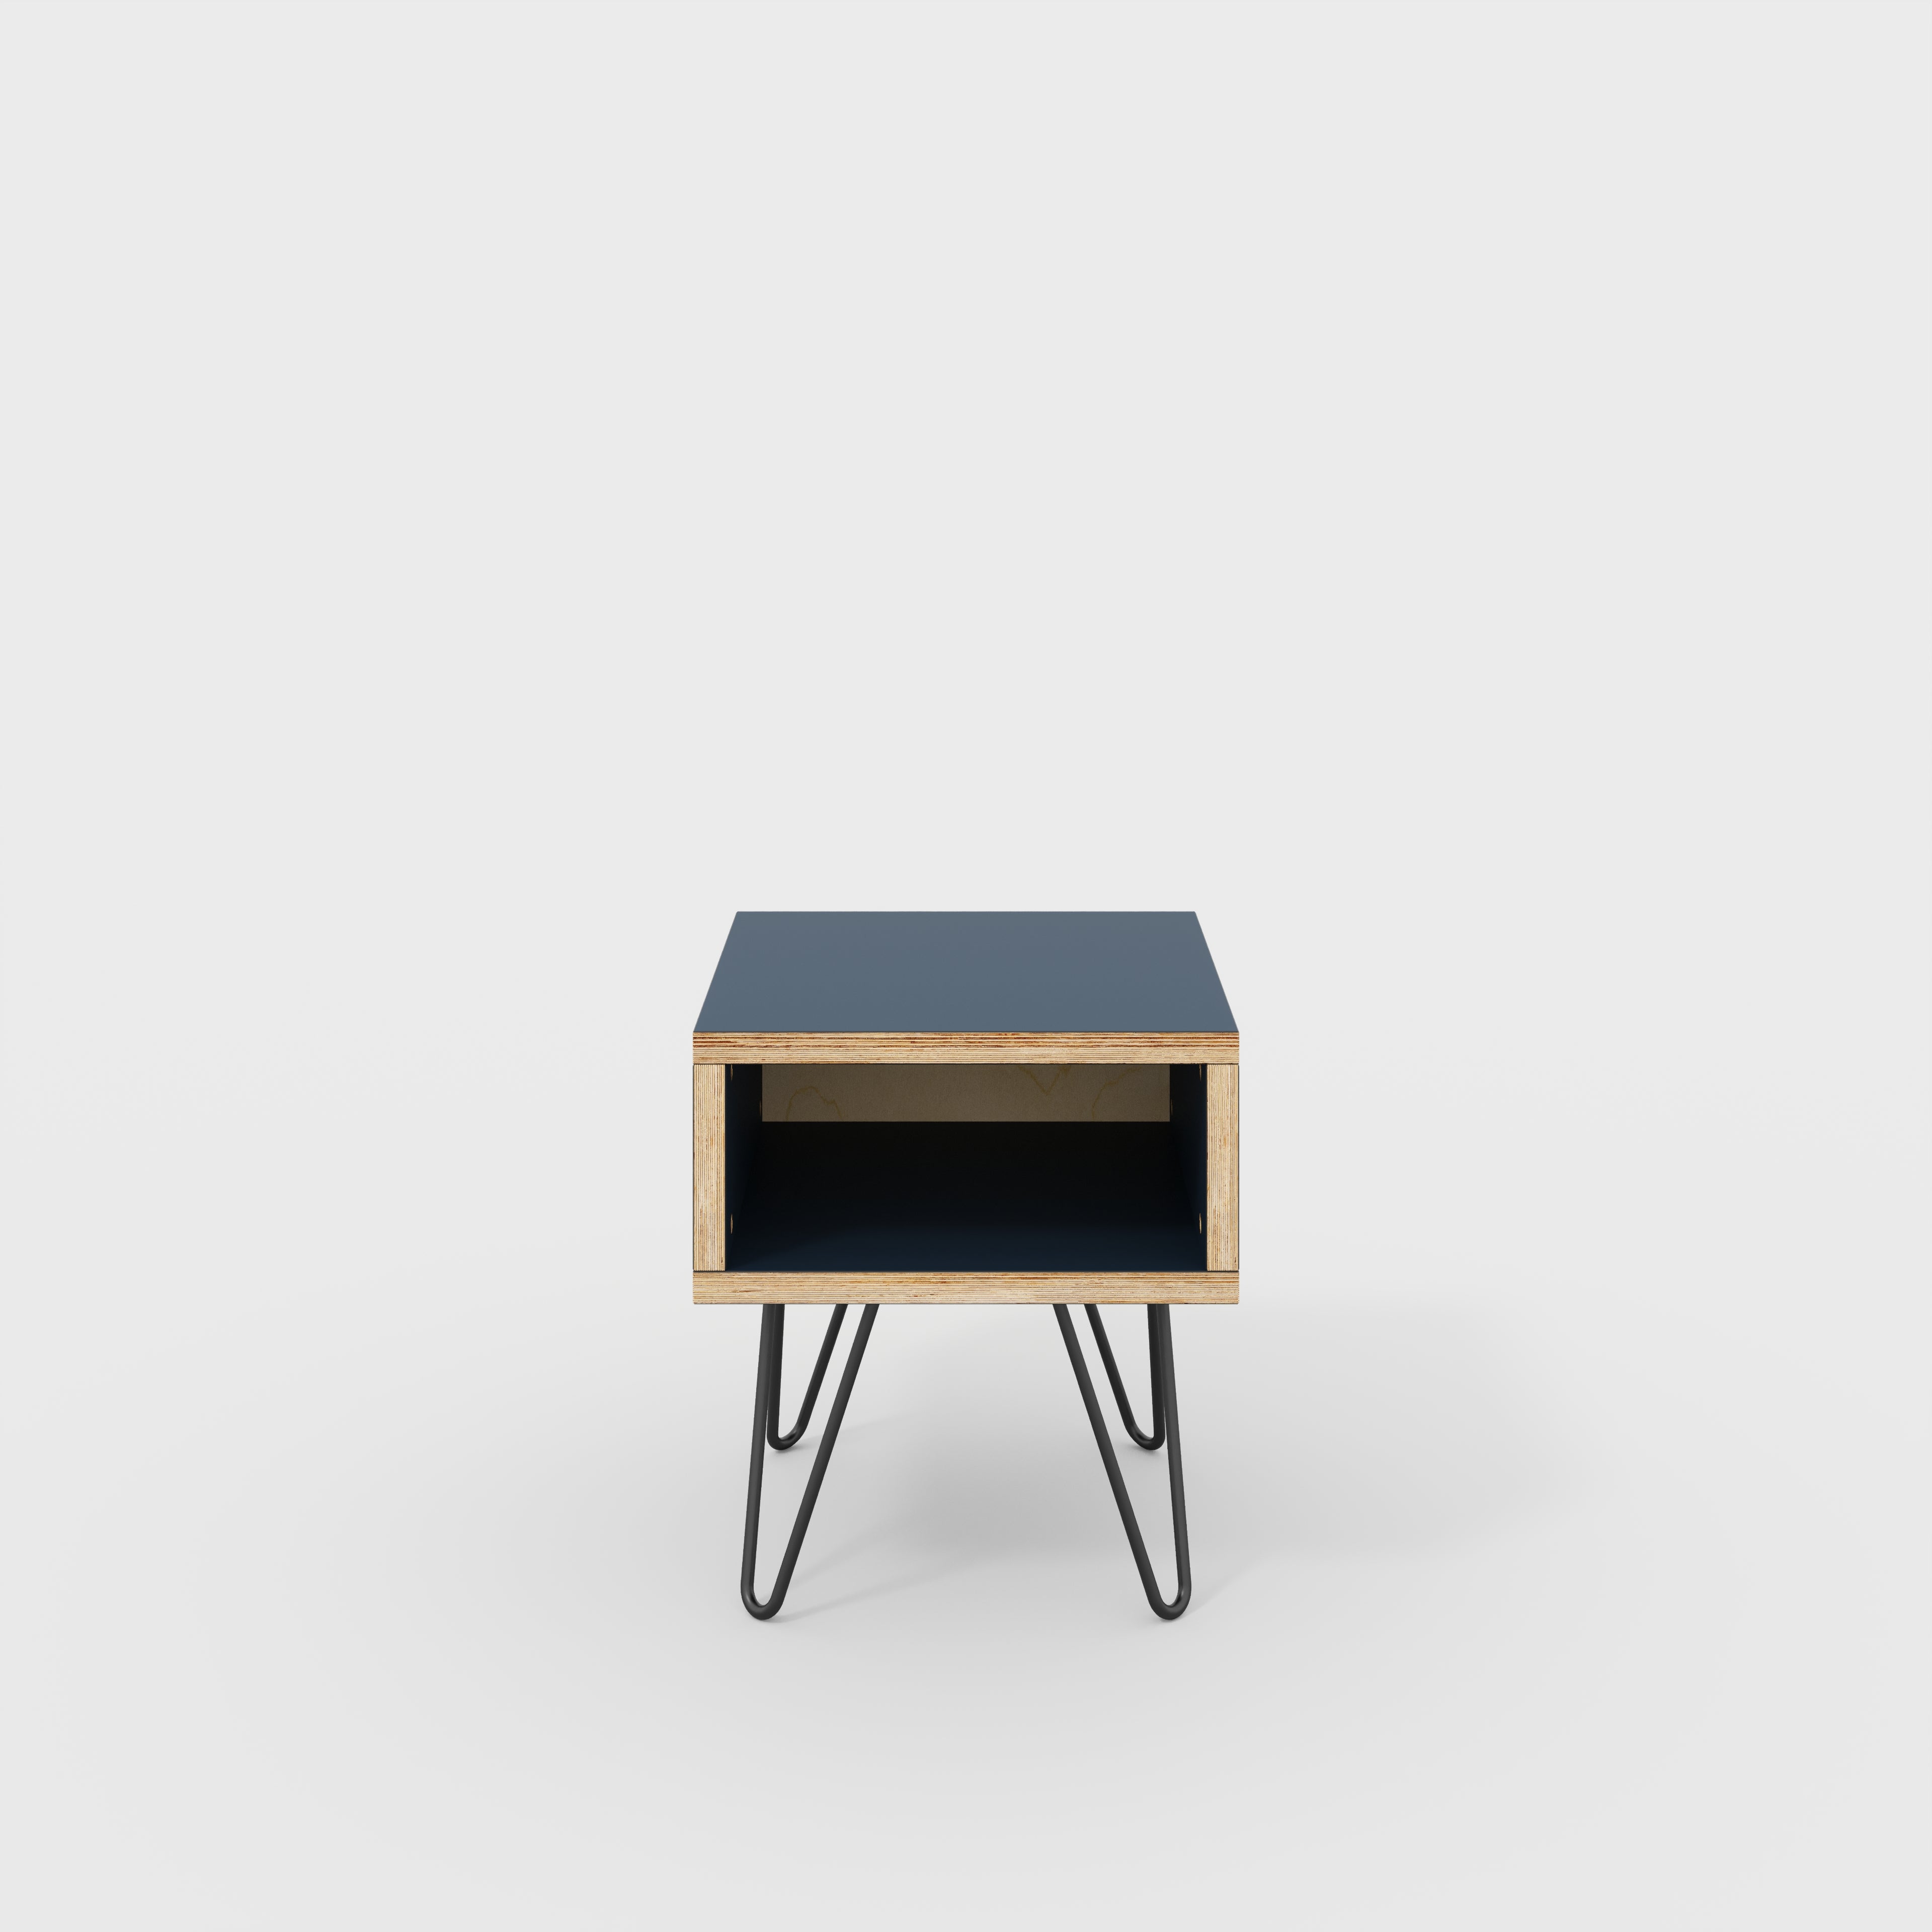 Bedside Table with Box Storage and Black Hairpin Legs - Formica Night Sea Blue - 400(w) x 400(d) x 450(h)